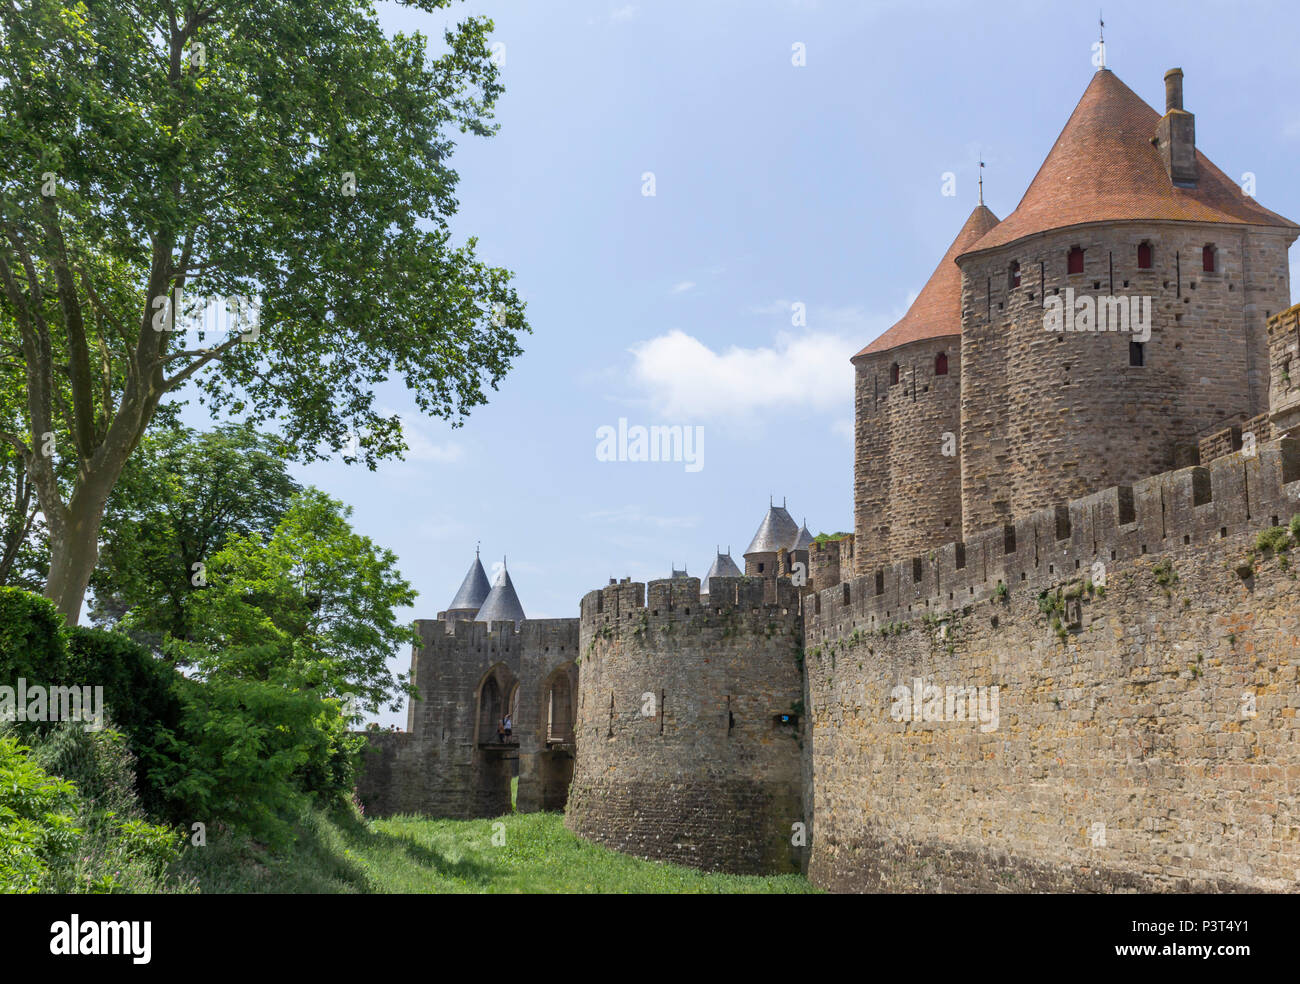 The medieval Cité of Carcassonne, French department of Aude, Occitanie Region, France. Outer walls, ramparts, turrets and towers. Stock Photo